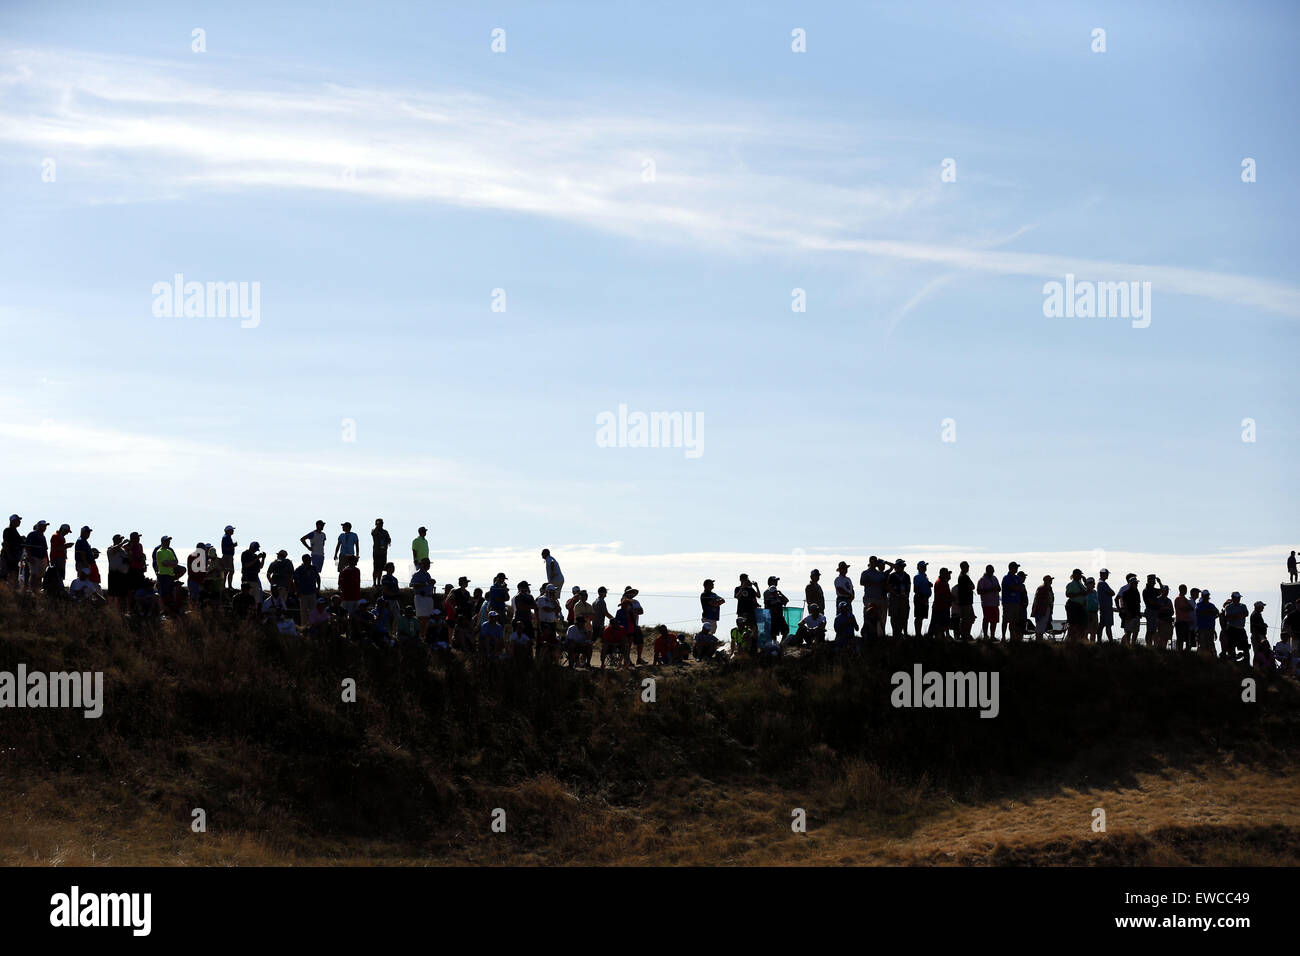 University Place, Washington, USA. 21st June, 2015. Fans Golf : General view during the final round of the 115th U.S. Open Championship at the Chambers Bay Golf Course in University Place, Washington, United States . © Koji Aoki/AFLO SPORT/Alamy Live News Stock Photo